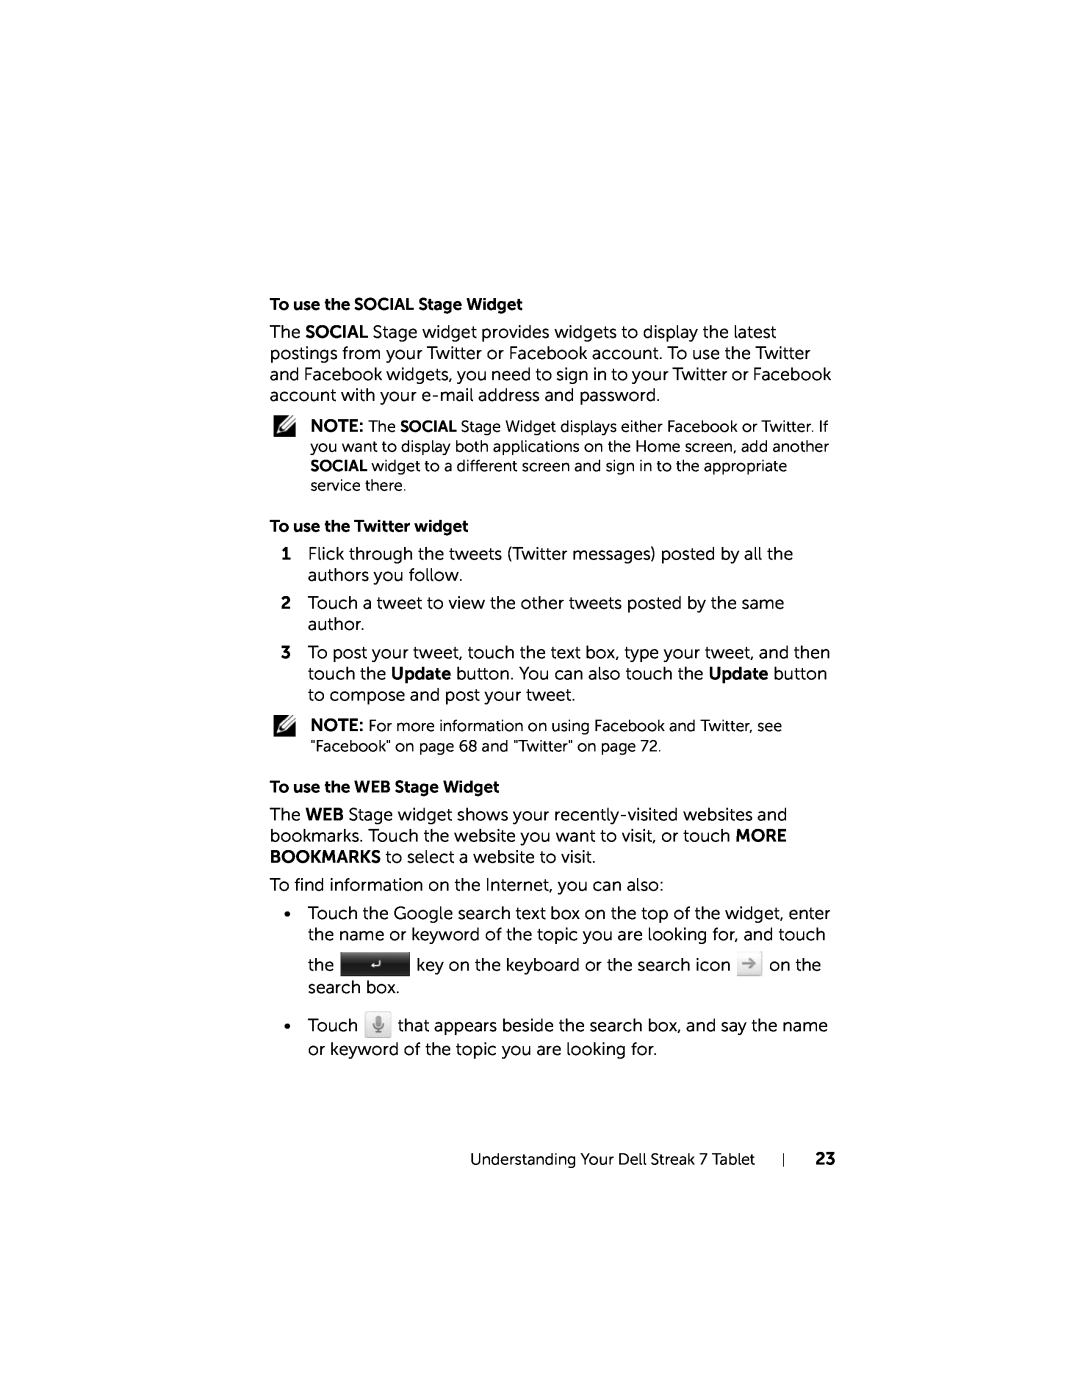 Dell 7 user manual To use the SOCIAL Stage Widget 